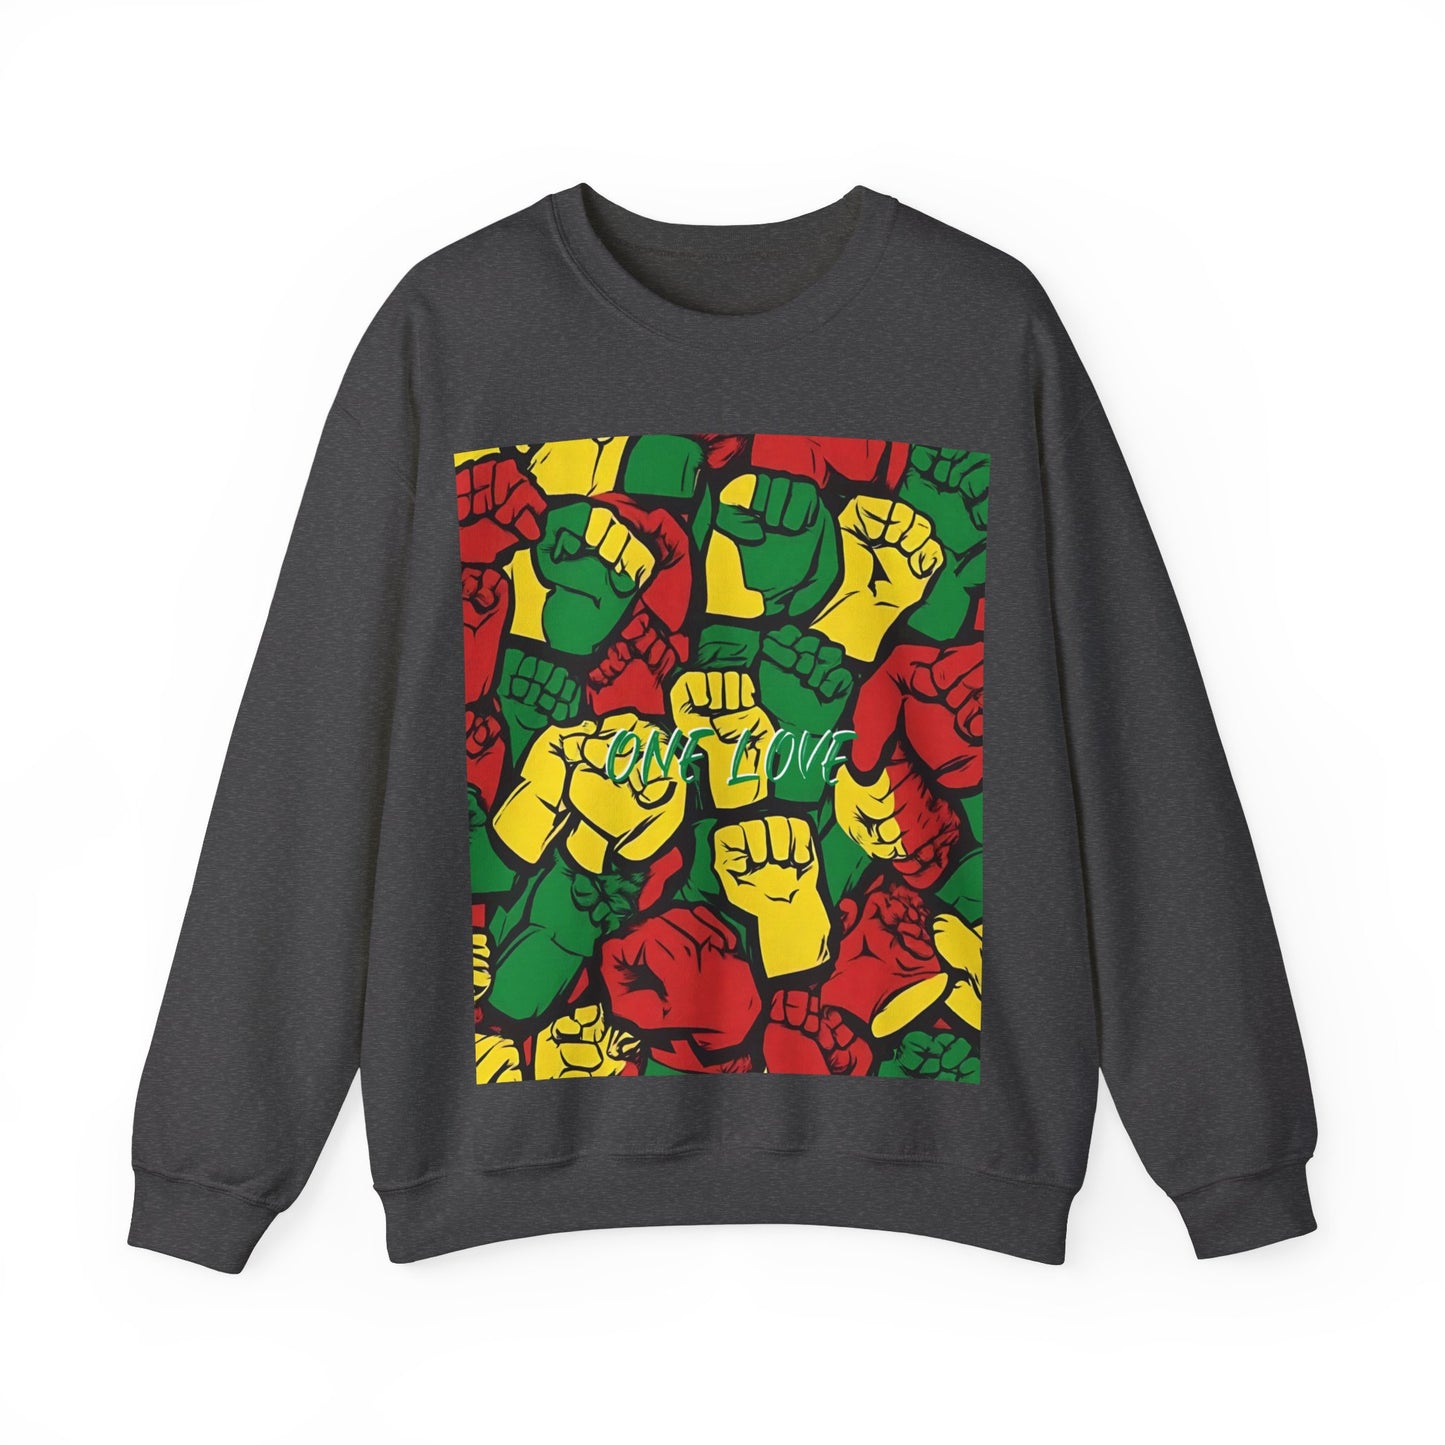 ONE LOVE CLENCHED FIST DESIGN SWEATSHIRT GIFT